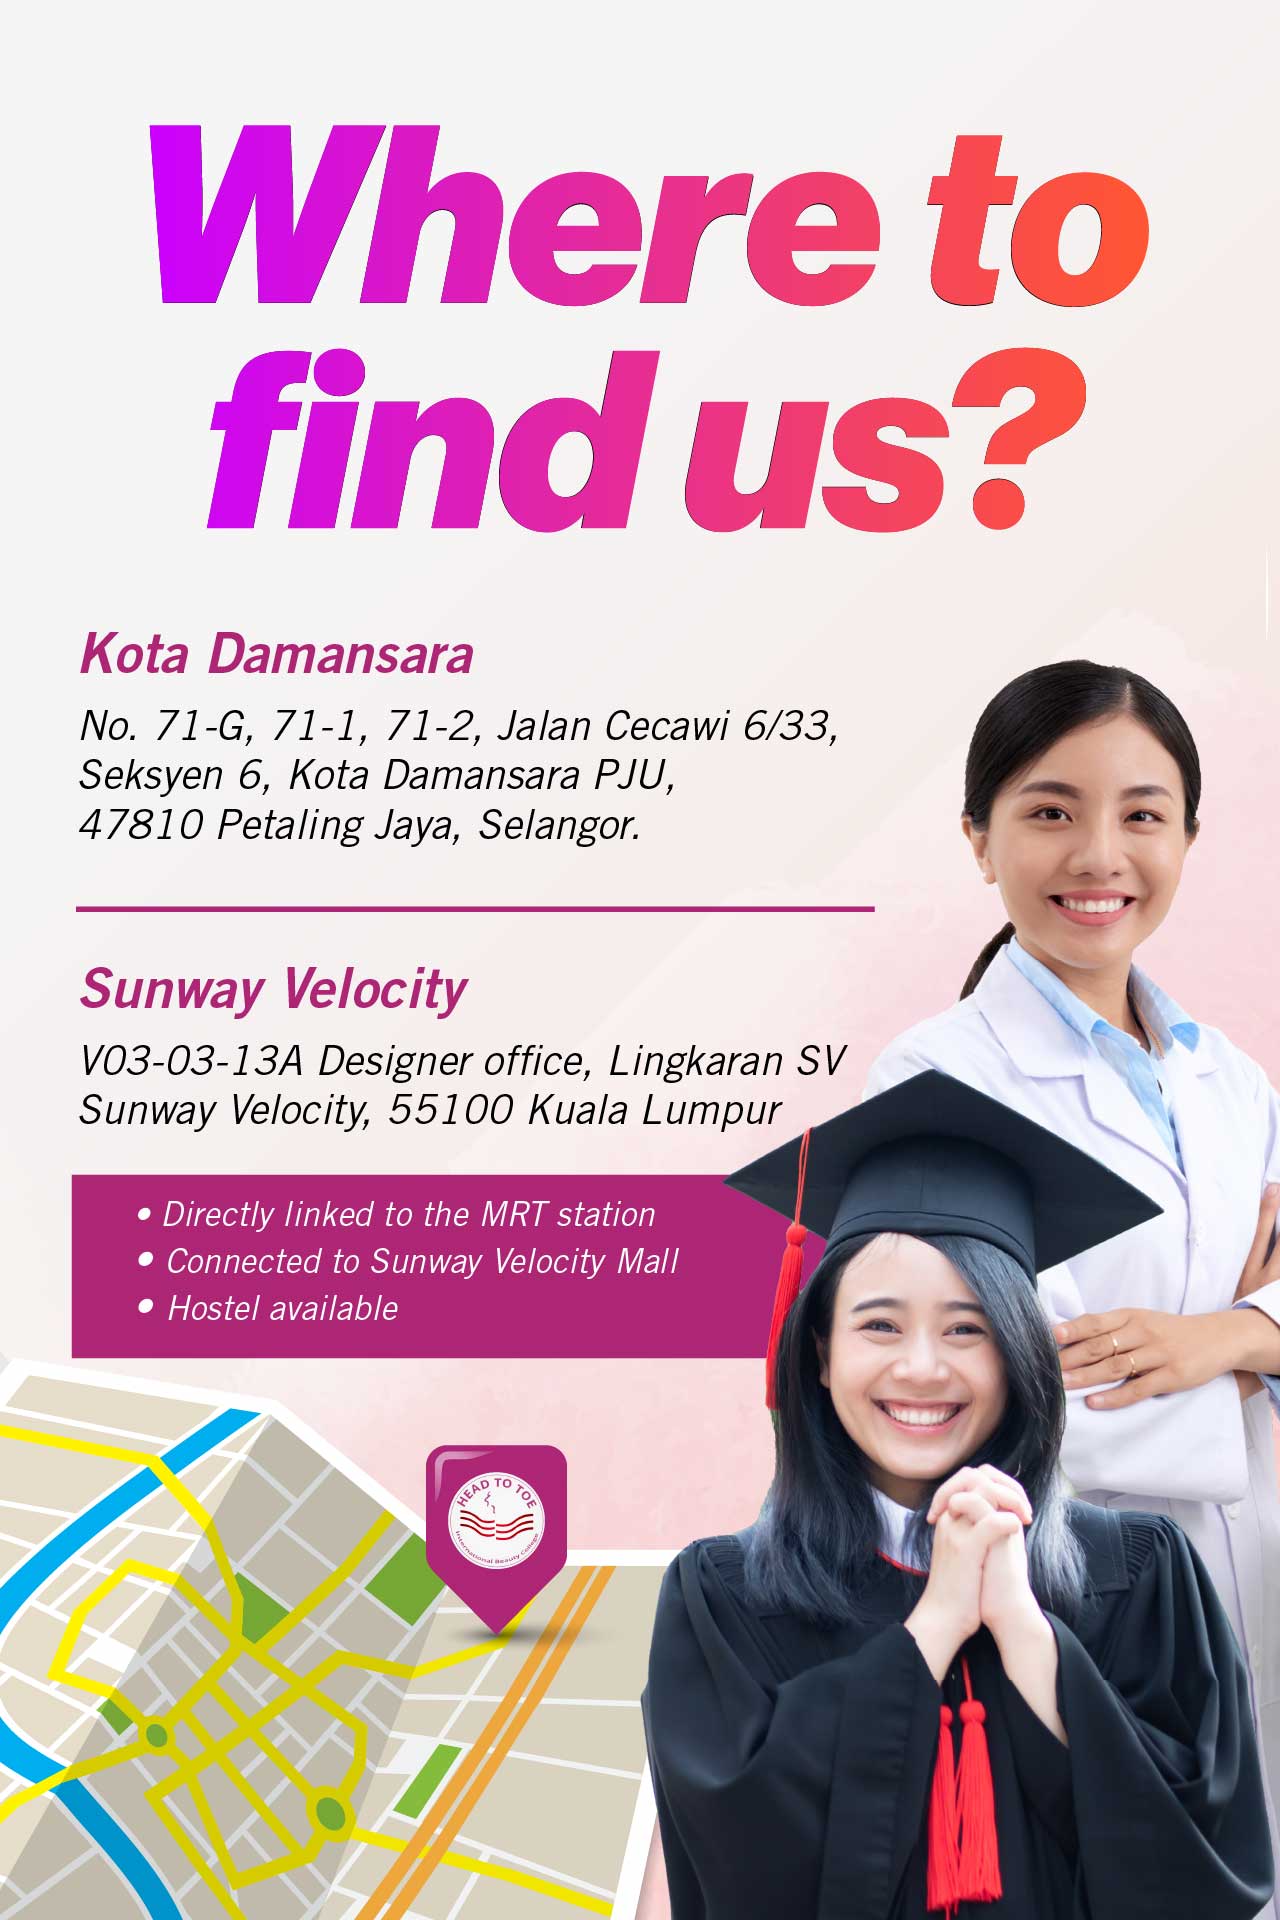 Where to find us?